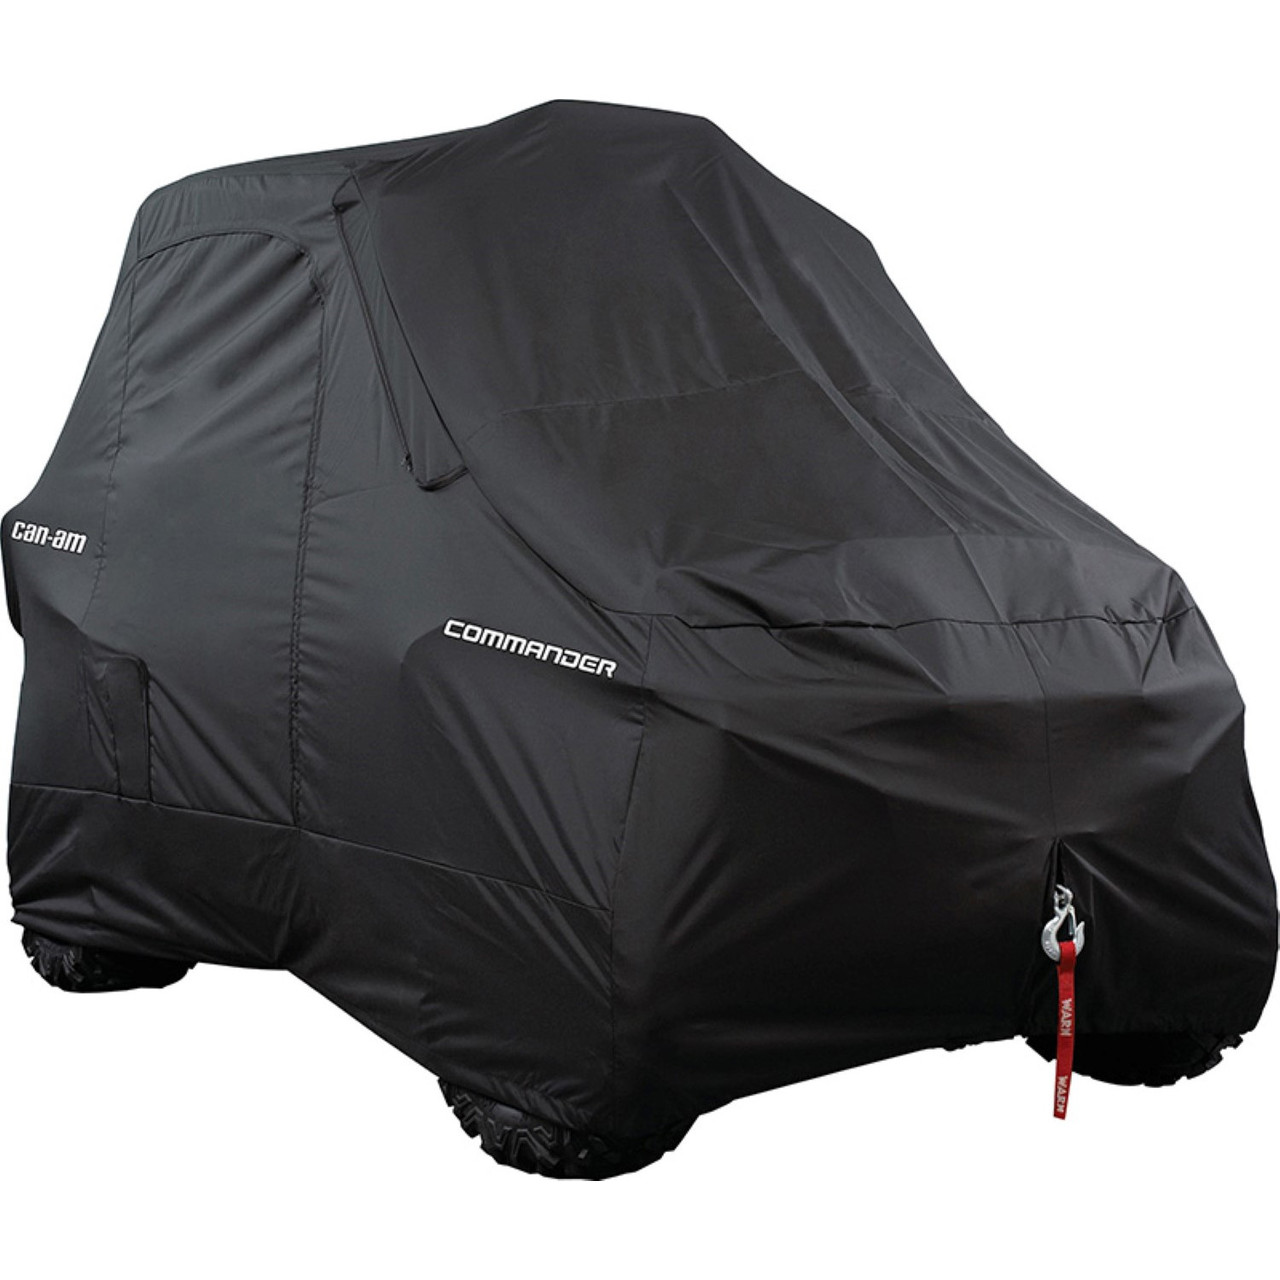 Can-Am Maverick New OEM Trailering and Storage Cover Black 715001655